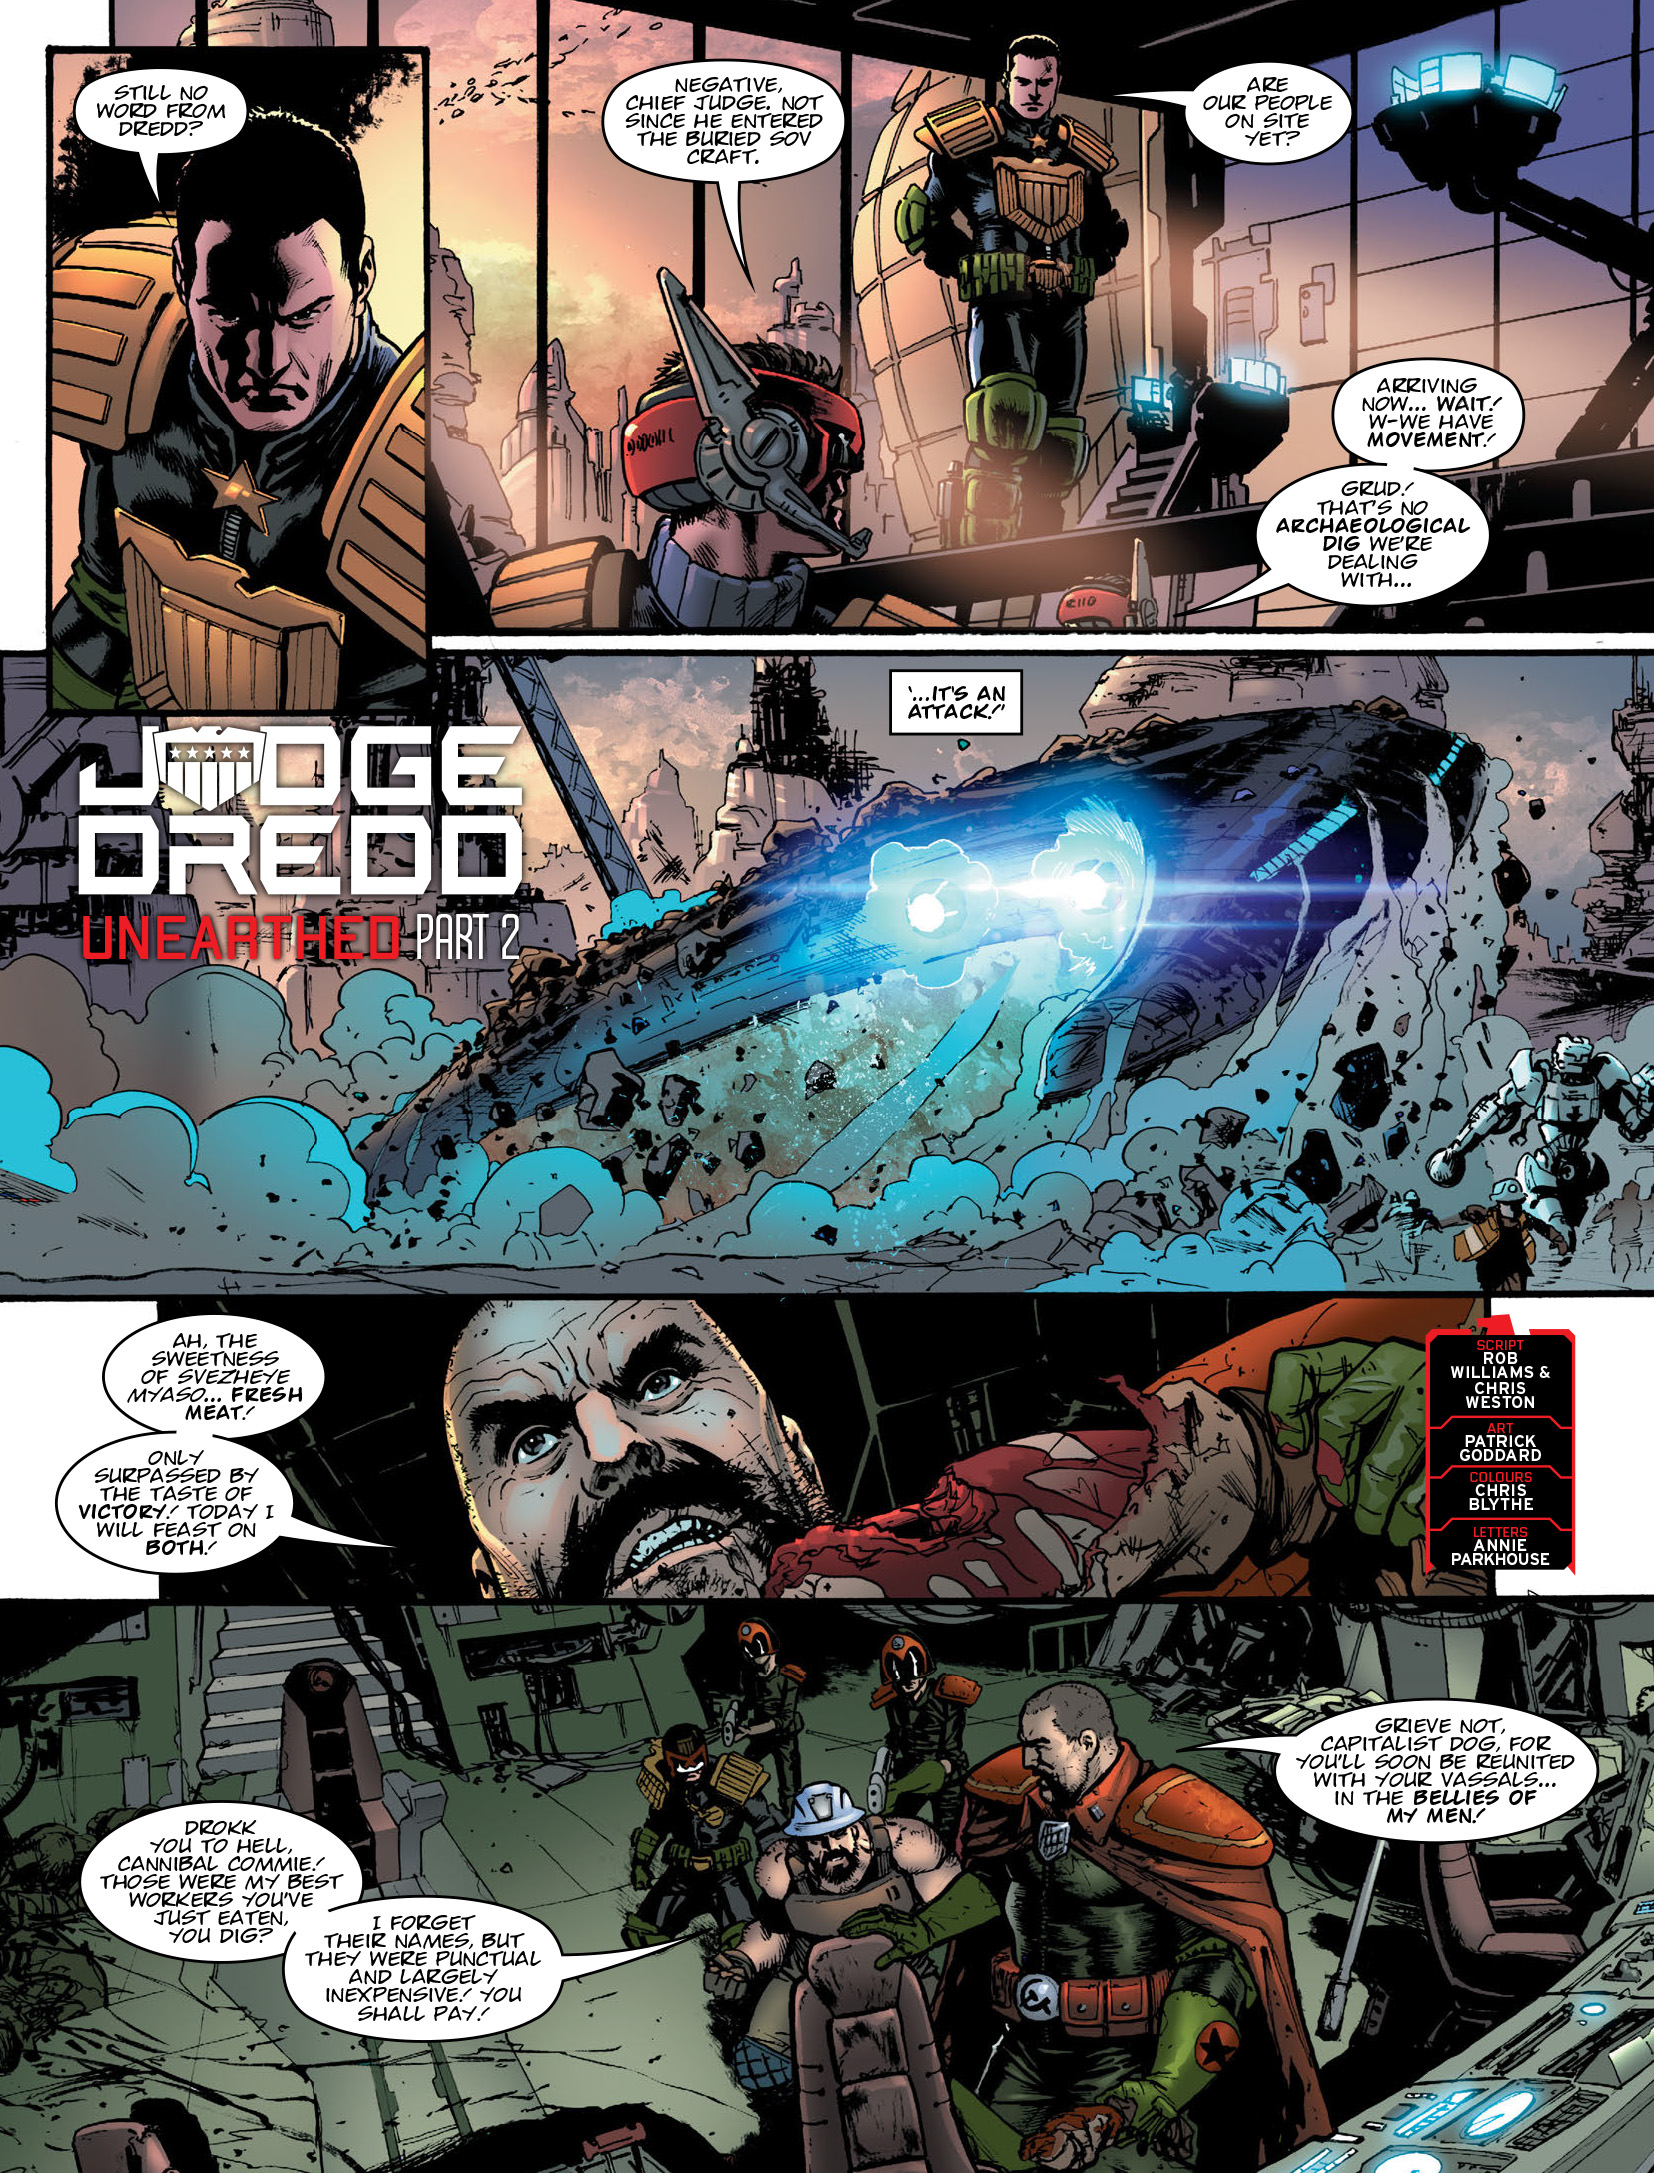 2000 AD: Chapter 2125 - Page 3